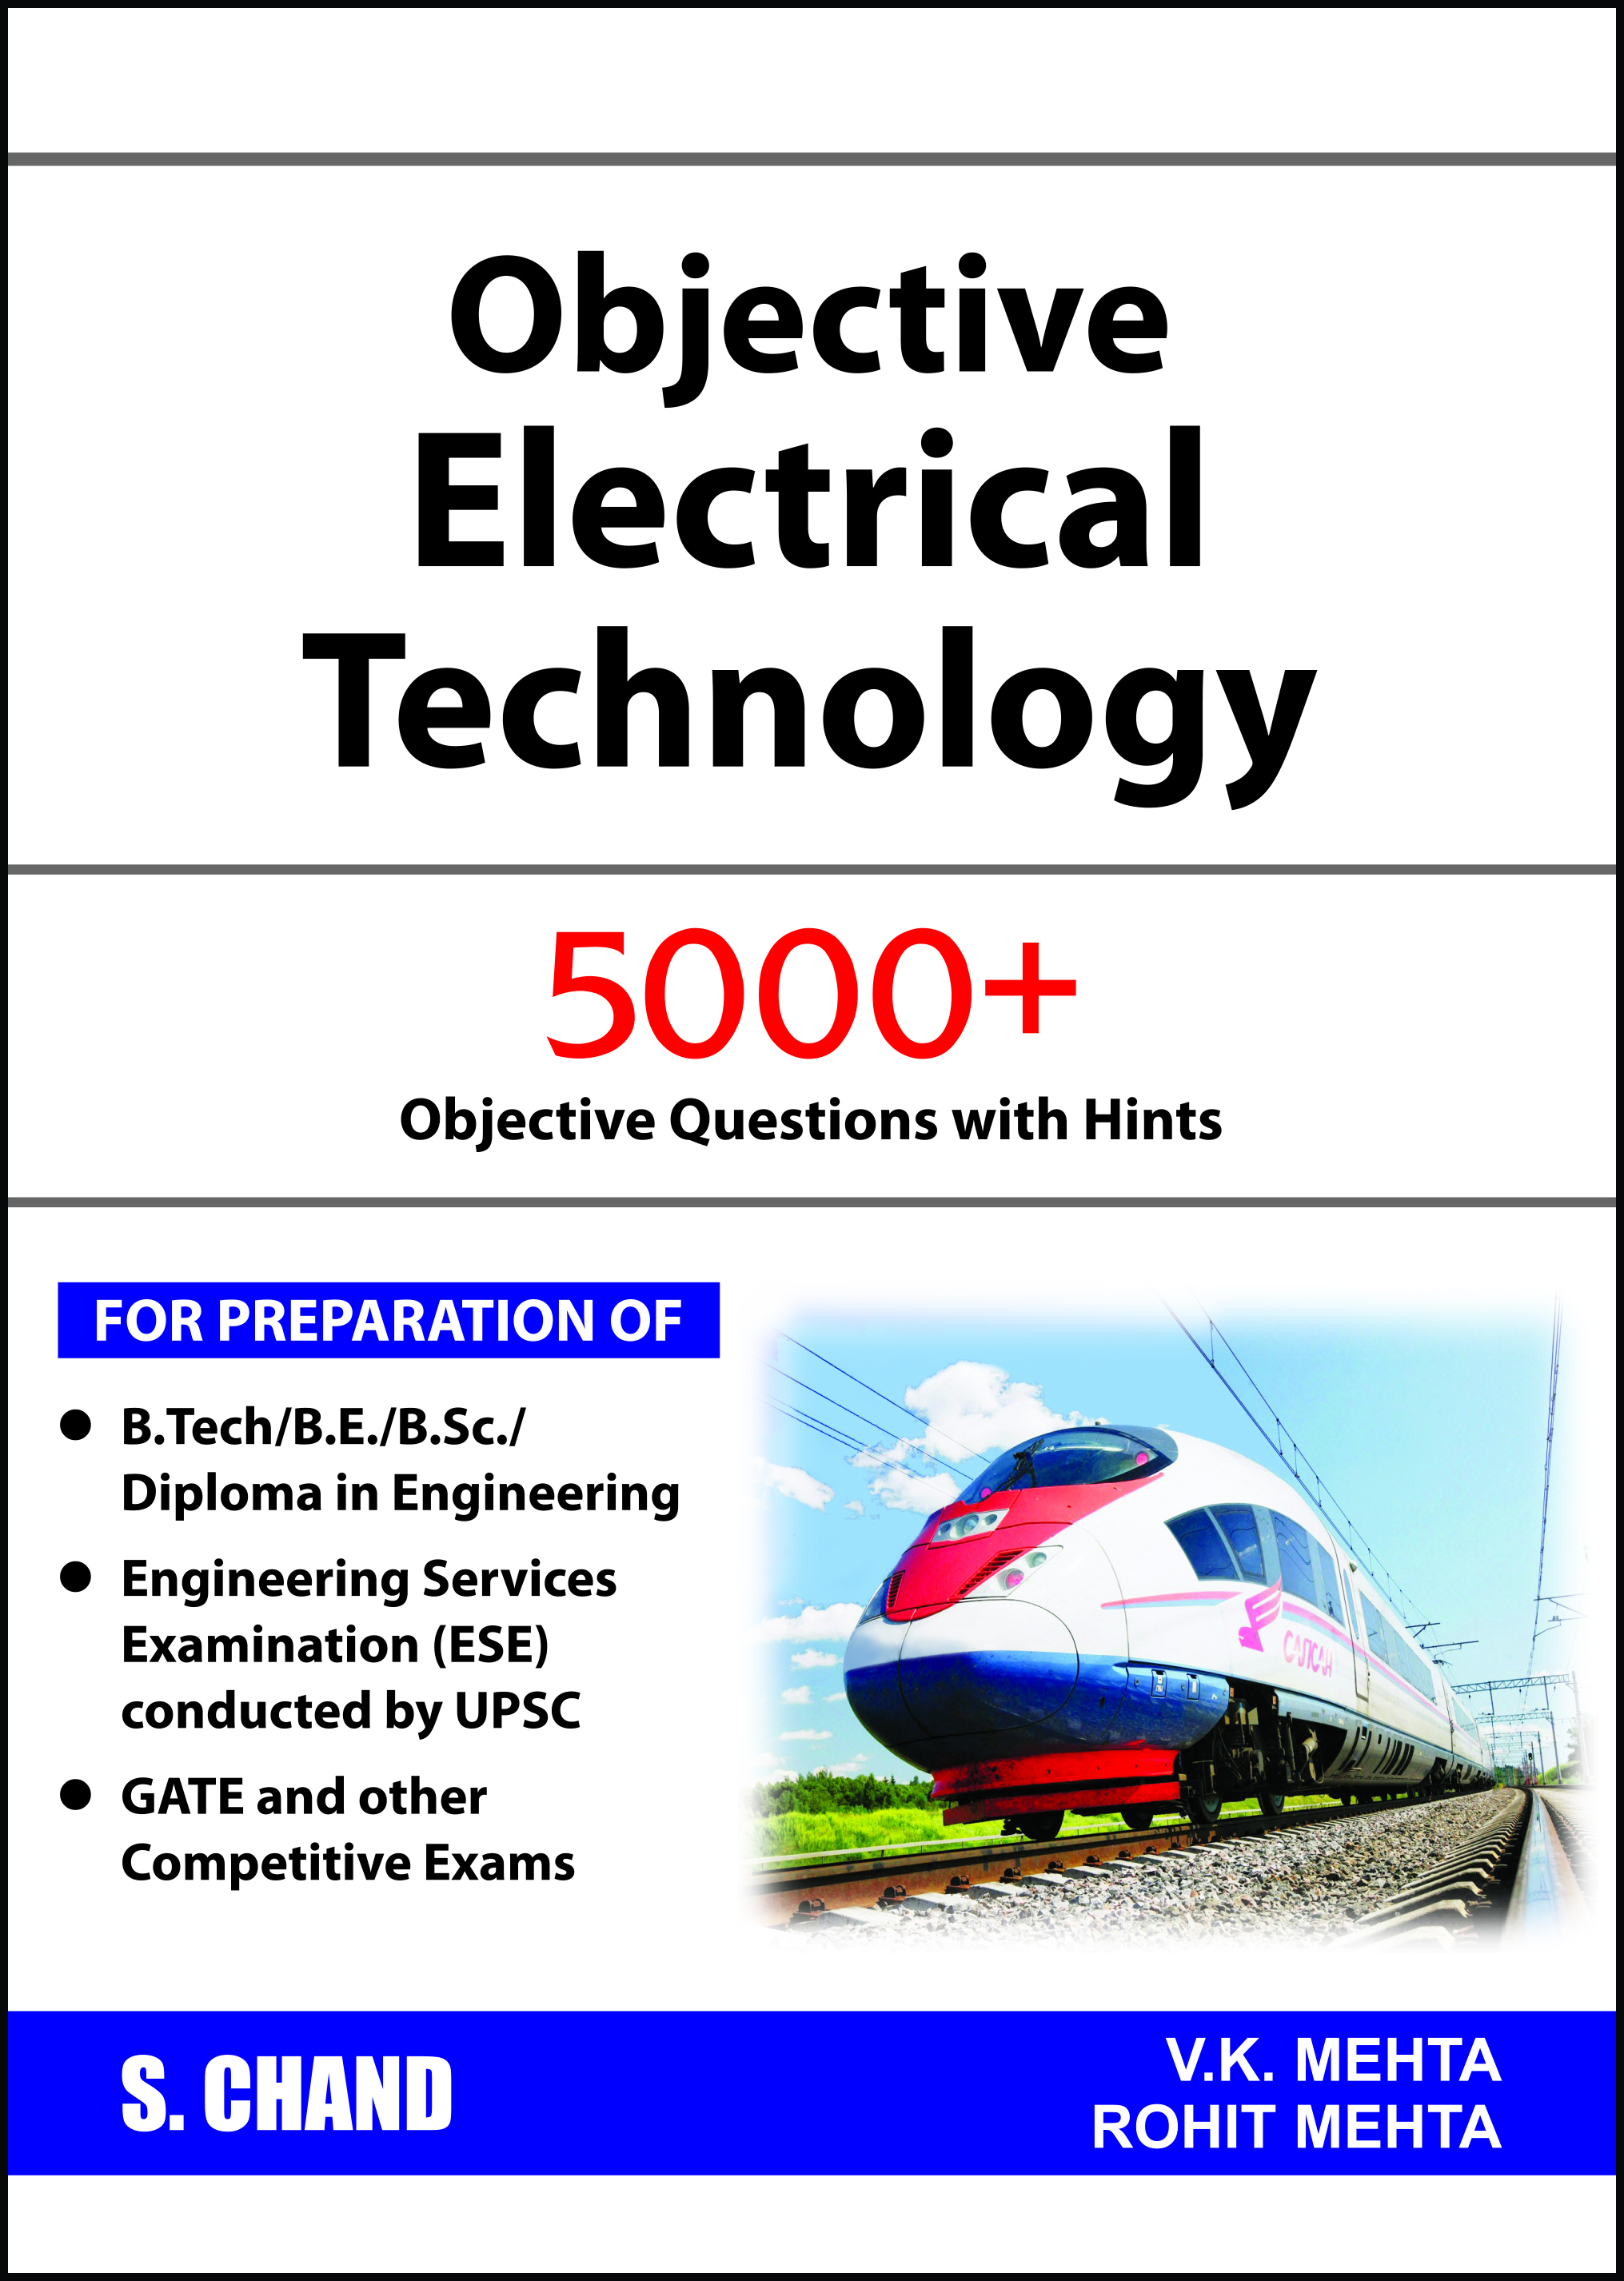 Objective Electrical Technology